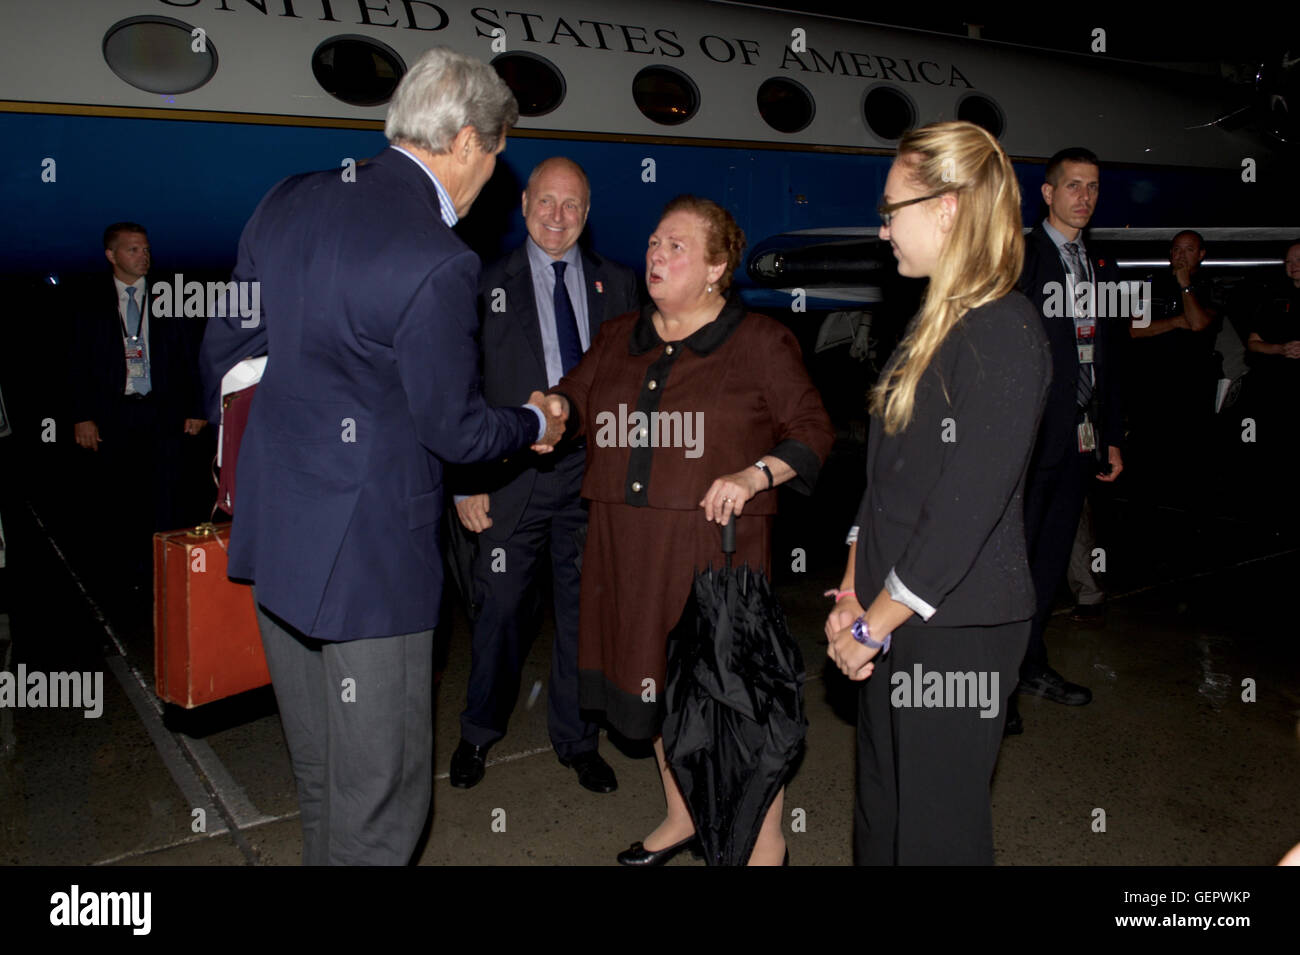 Secretary Kerry Shakes Hands with Acting Assistant Secretary for Western Hemisphere Affairs Mari Carmen Aponte After Landing in Ottawa, Canada Stock Photo